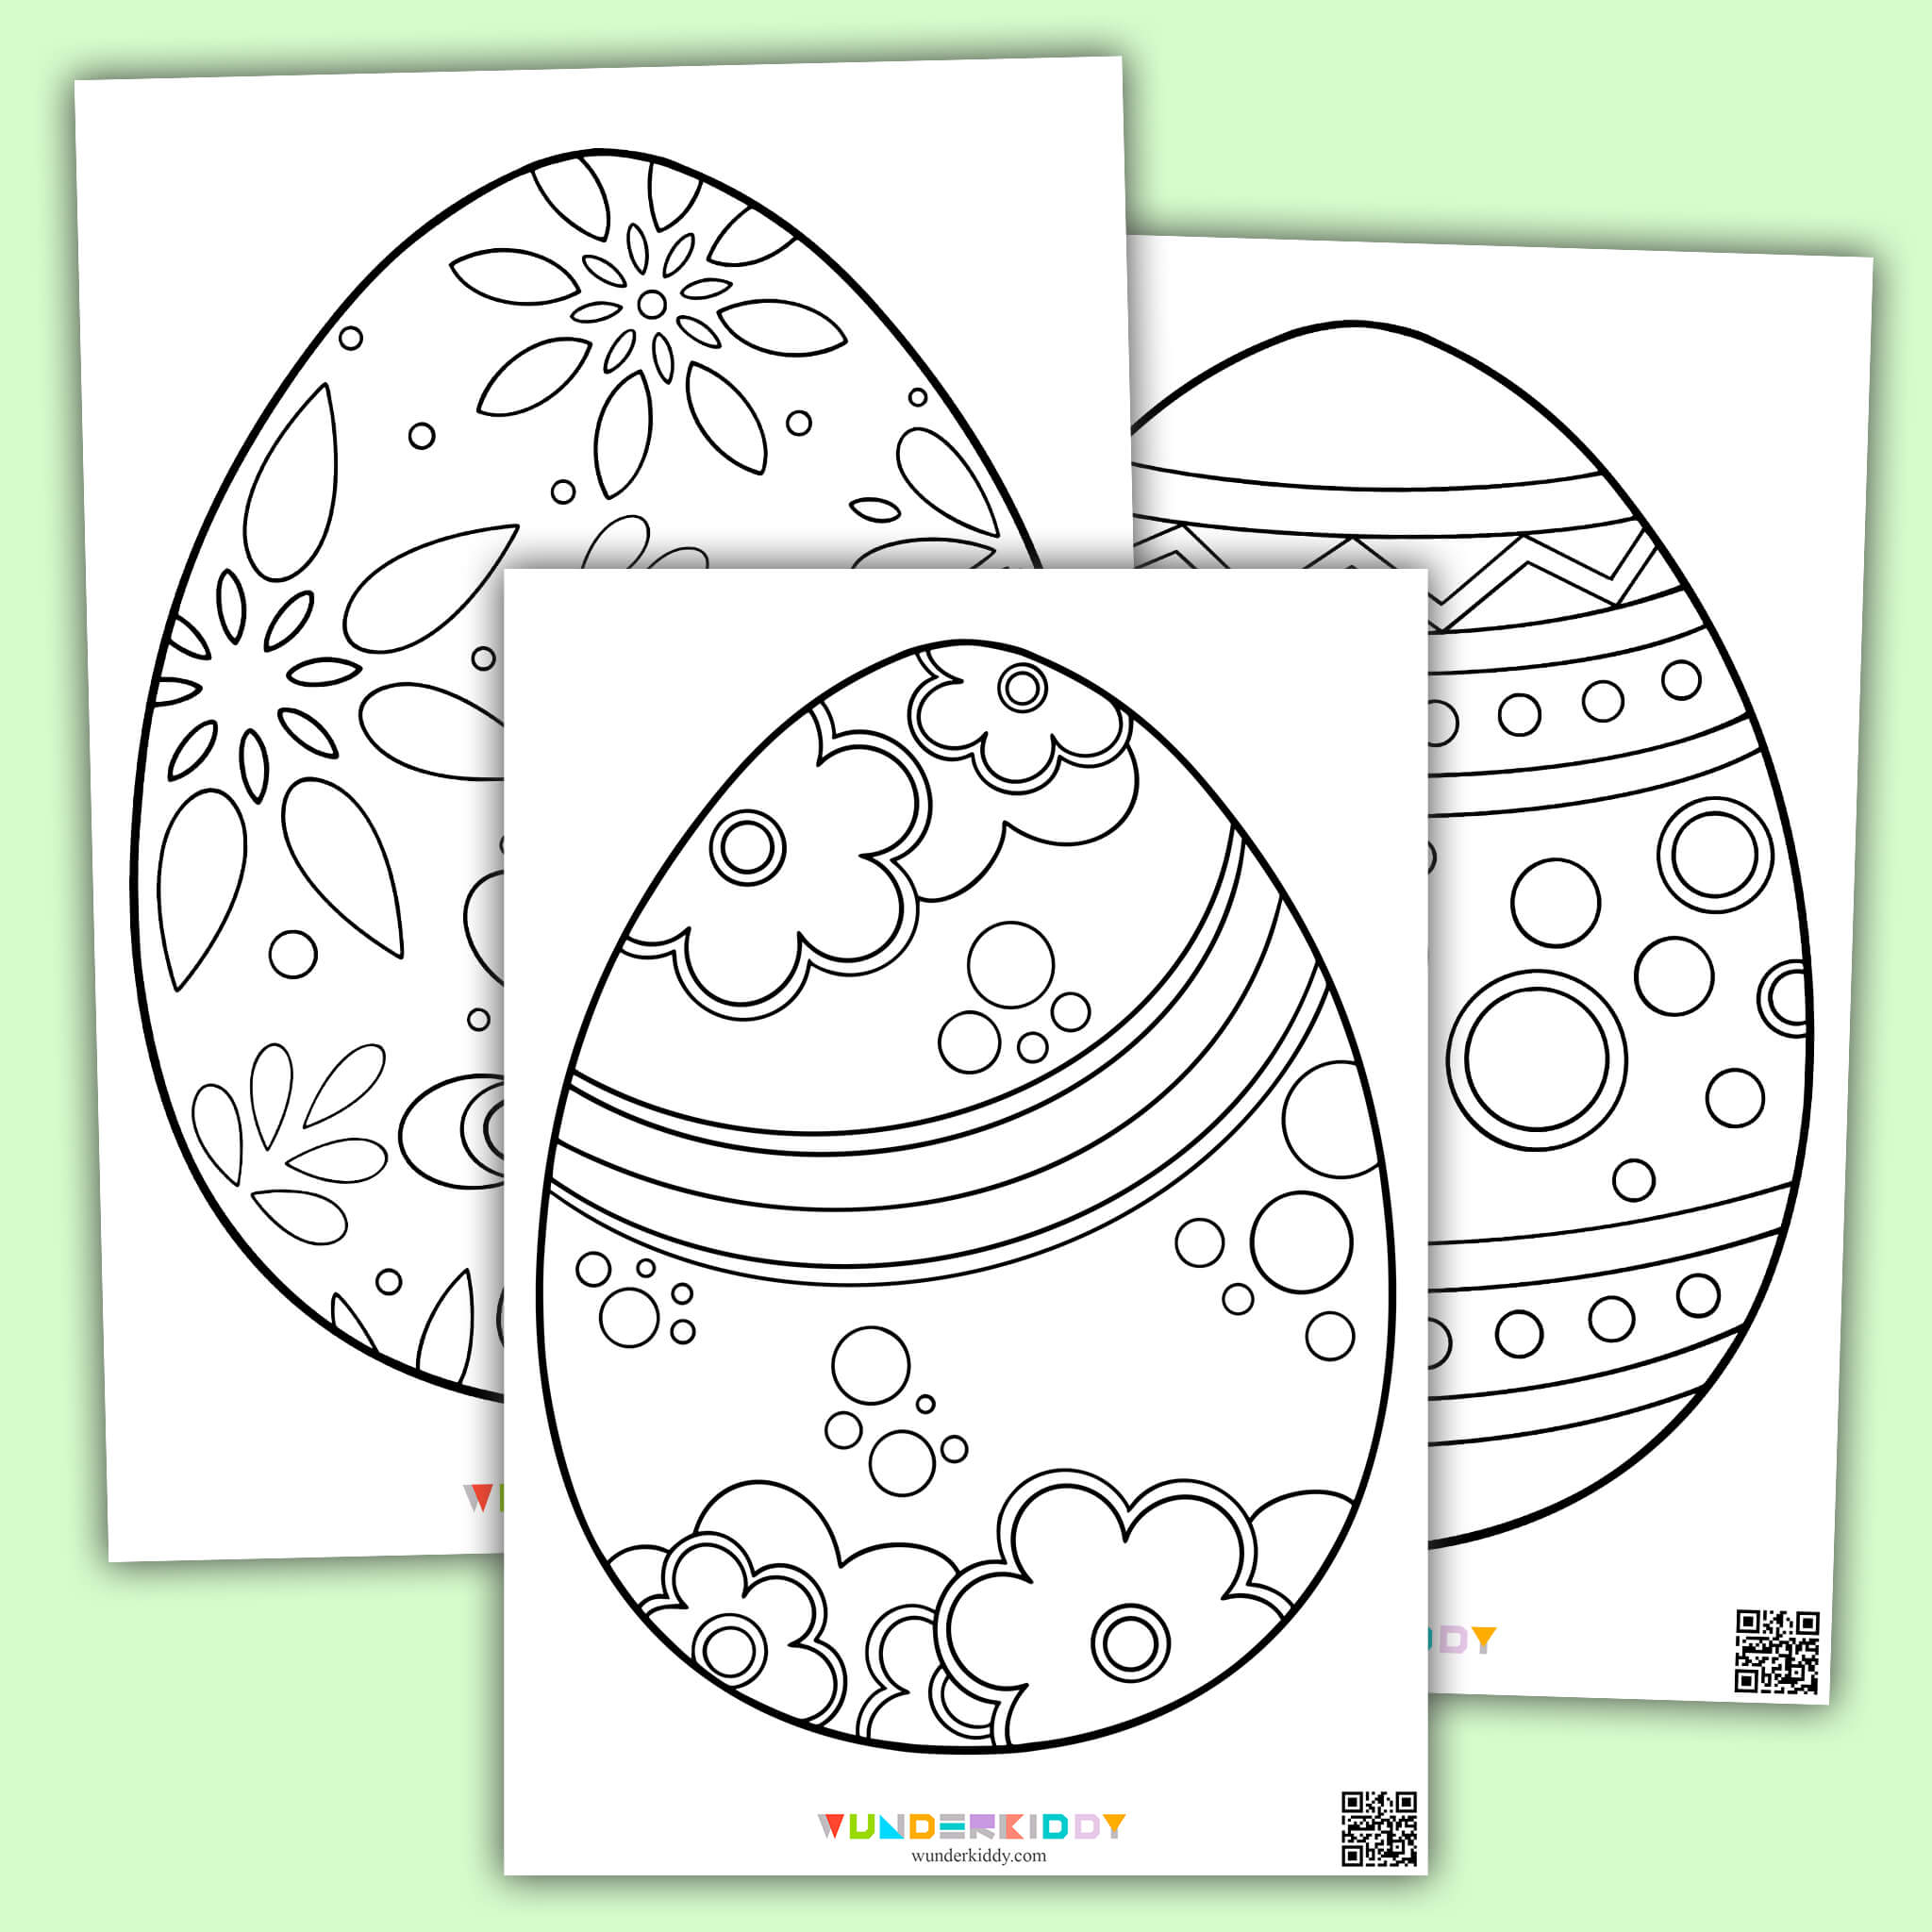 Printable easter egg template and colouring page pdf